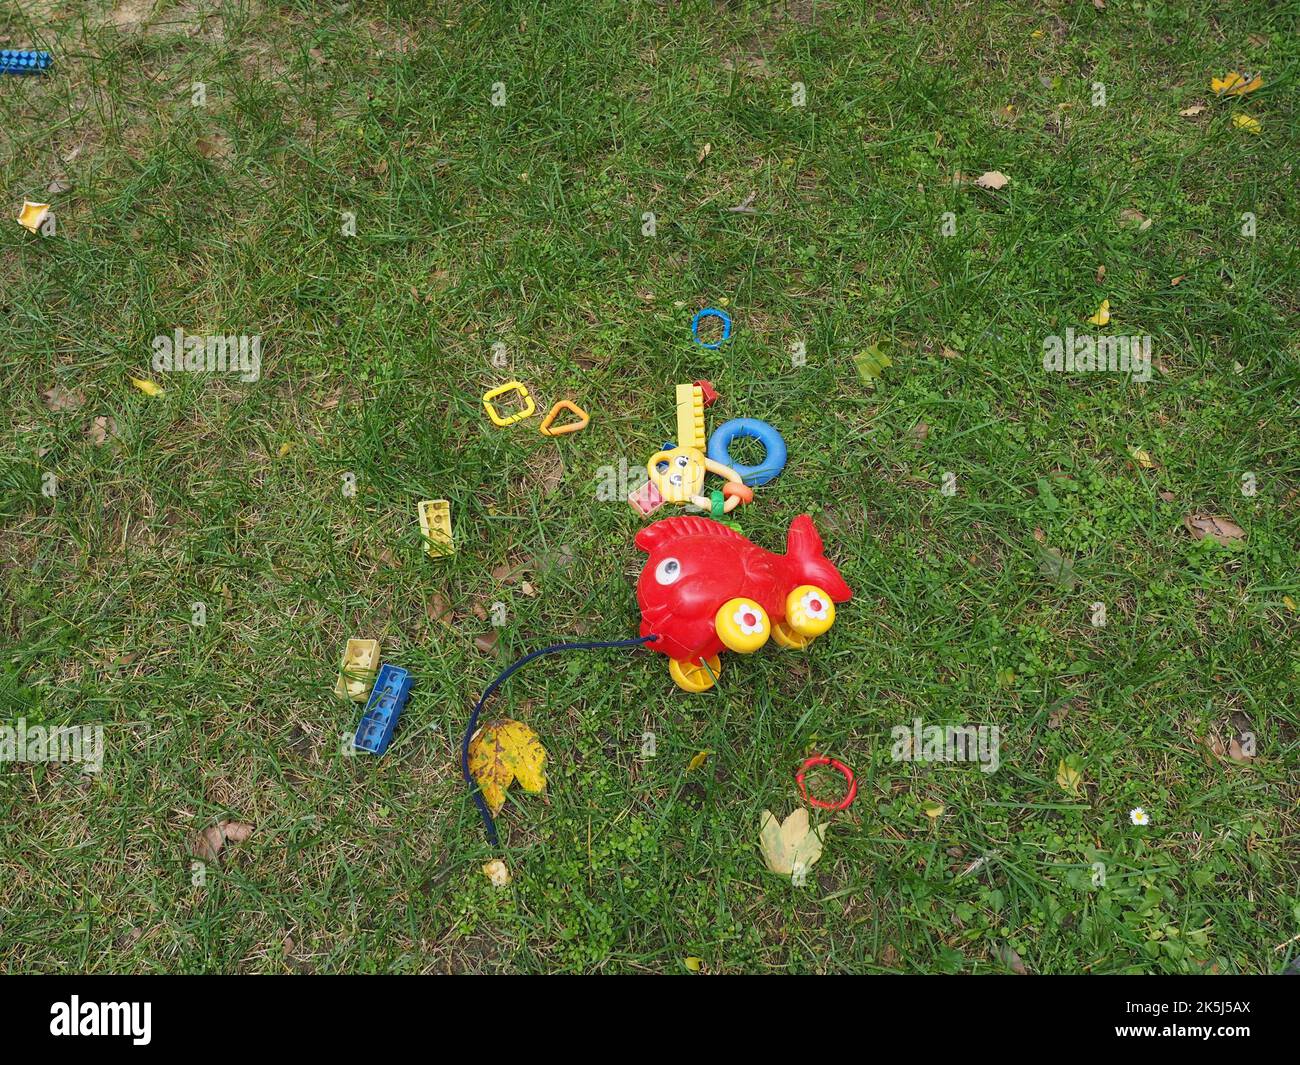 Retro, old plastic fish toy on wheels with other plastic toys around laying in the grass on a playground. Toys for toddlers left by children. Stock Photo